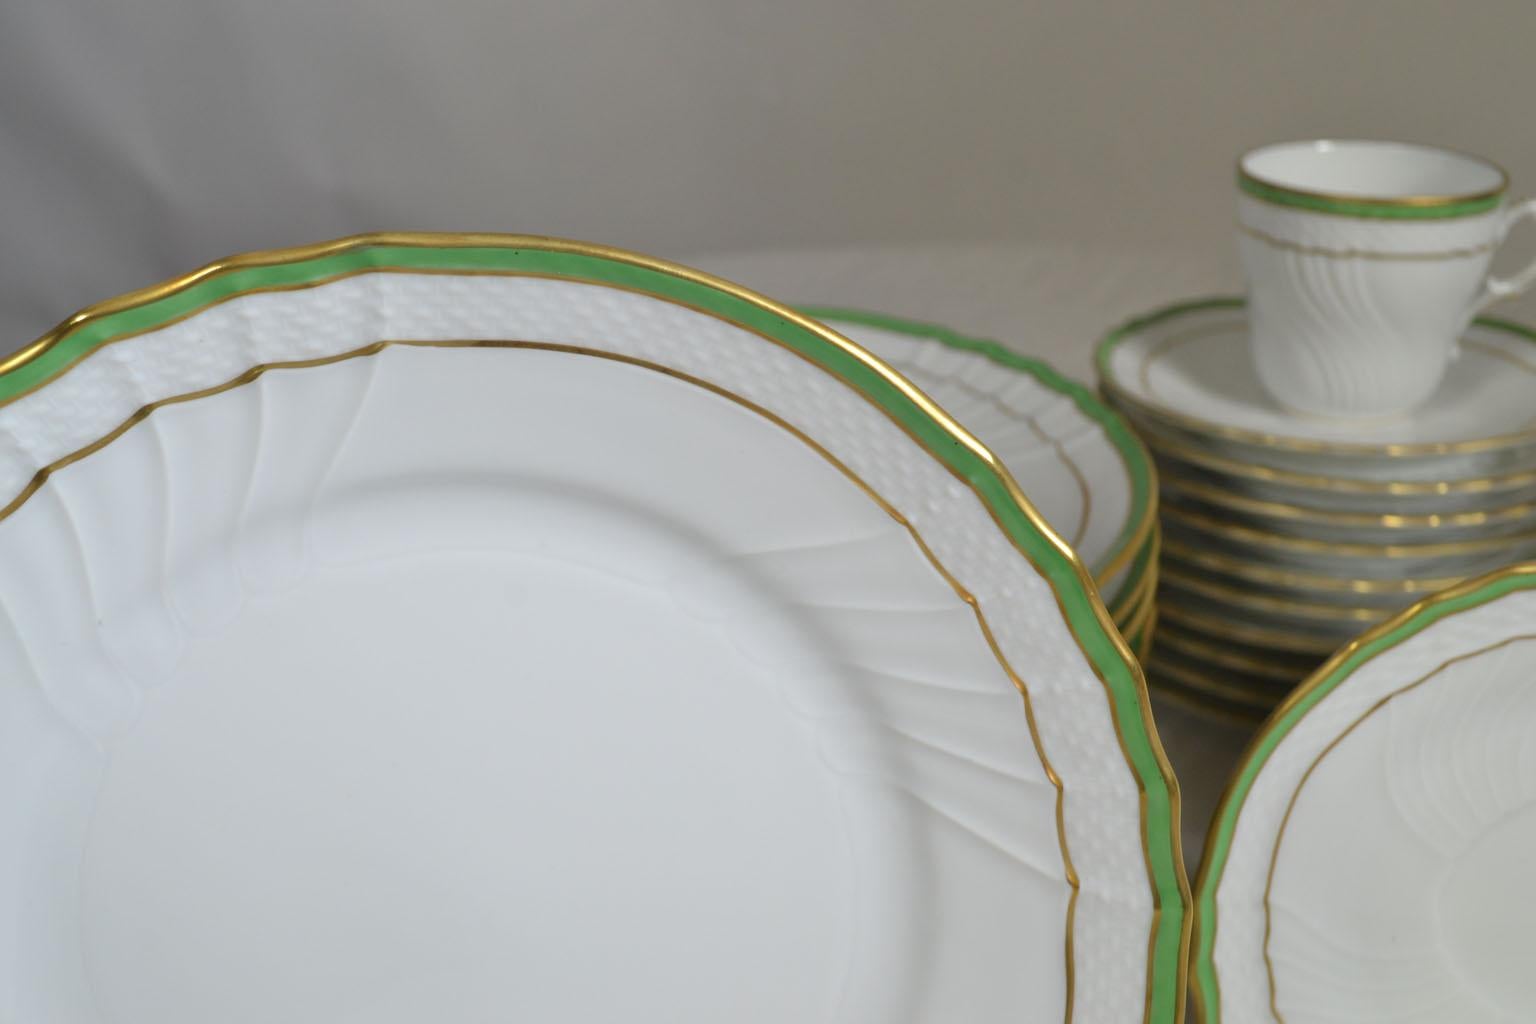 33-piece white and green porcelain Richard Ginori demitasse service for 8, with gilt trim, scalloped rims and brand stamp at undersides. Includes 12 dessert plates, 9 demitasse cups and 12 saucers. Made in Italy.